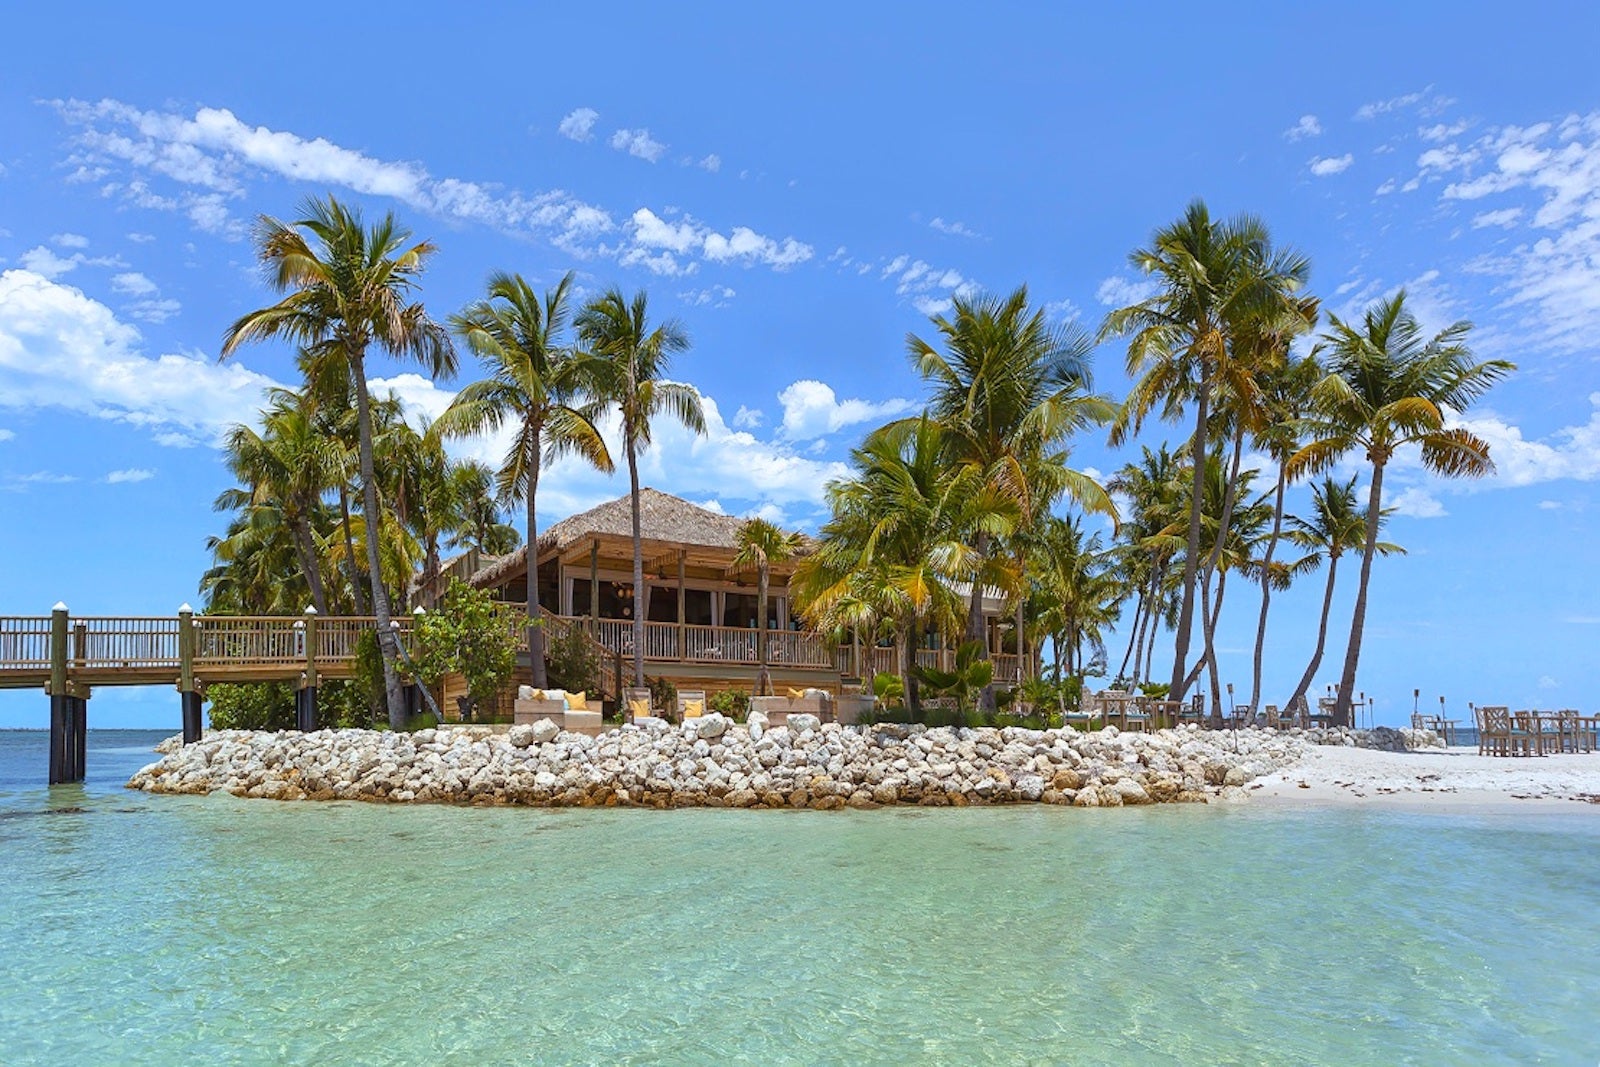 The 17 best all-inclusive resorts in the US - The Points Guy